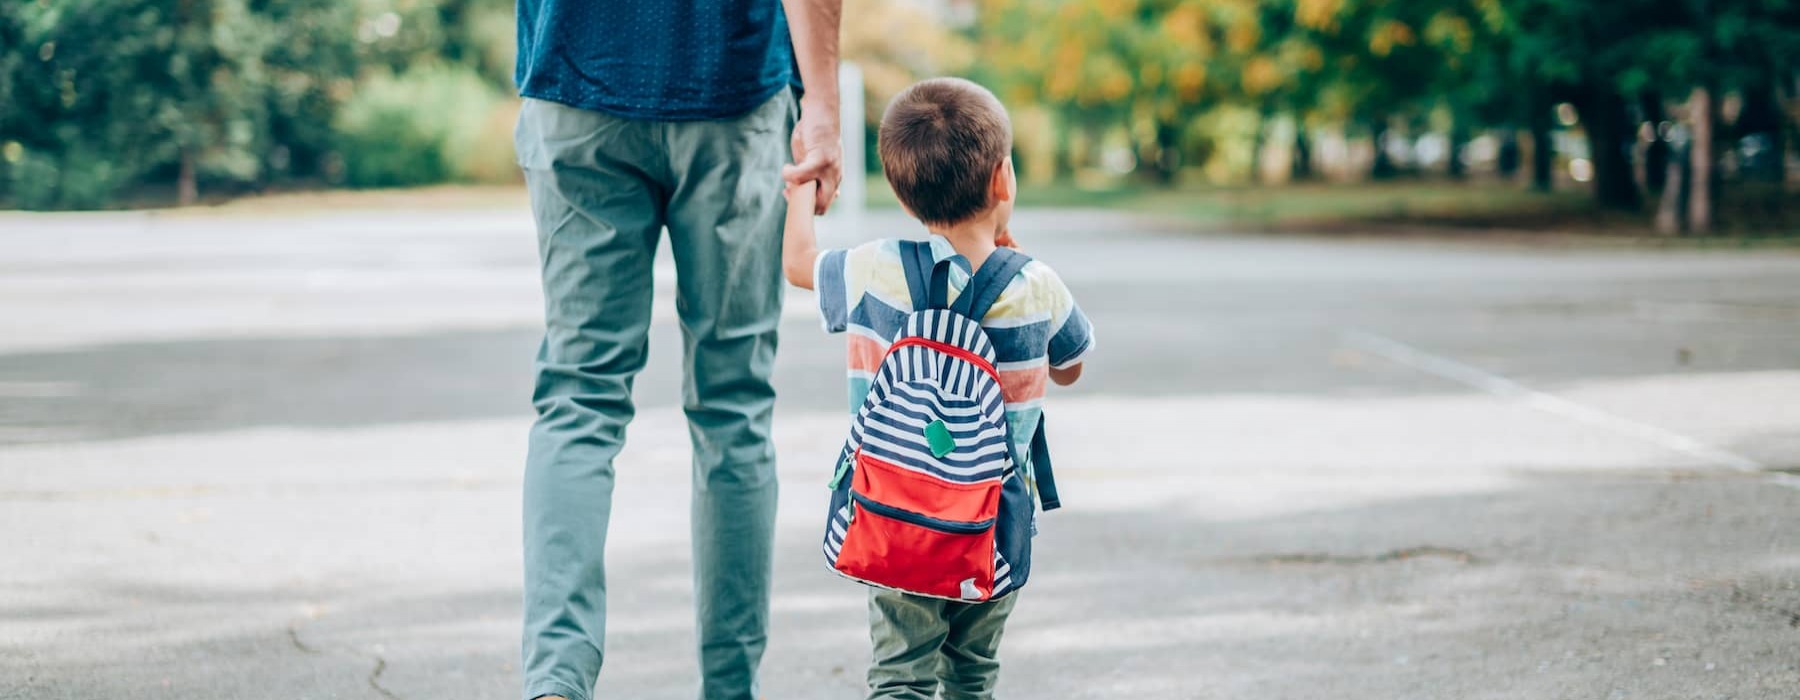 lifestyle image of a person walking with their child outside